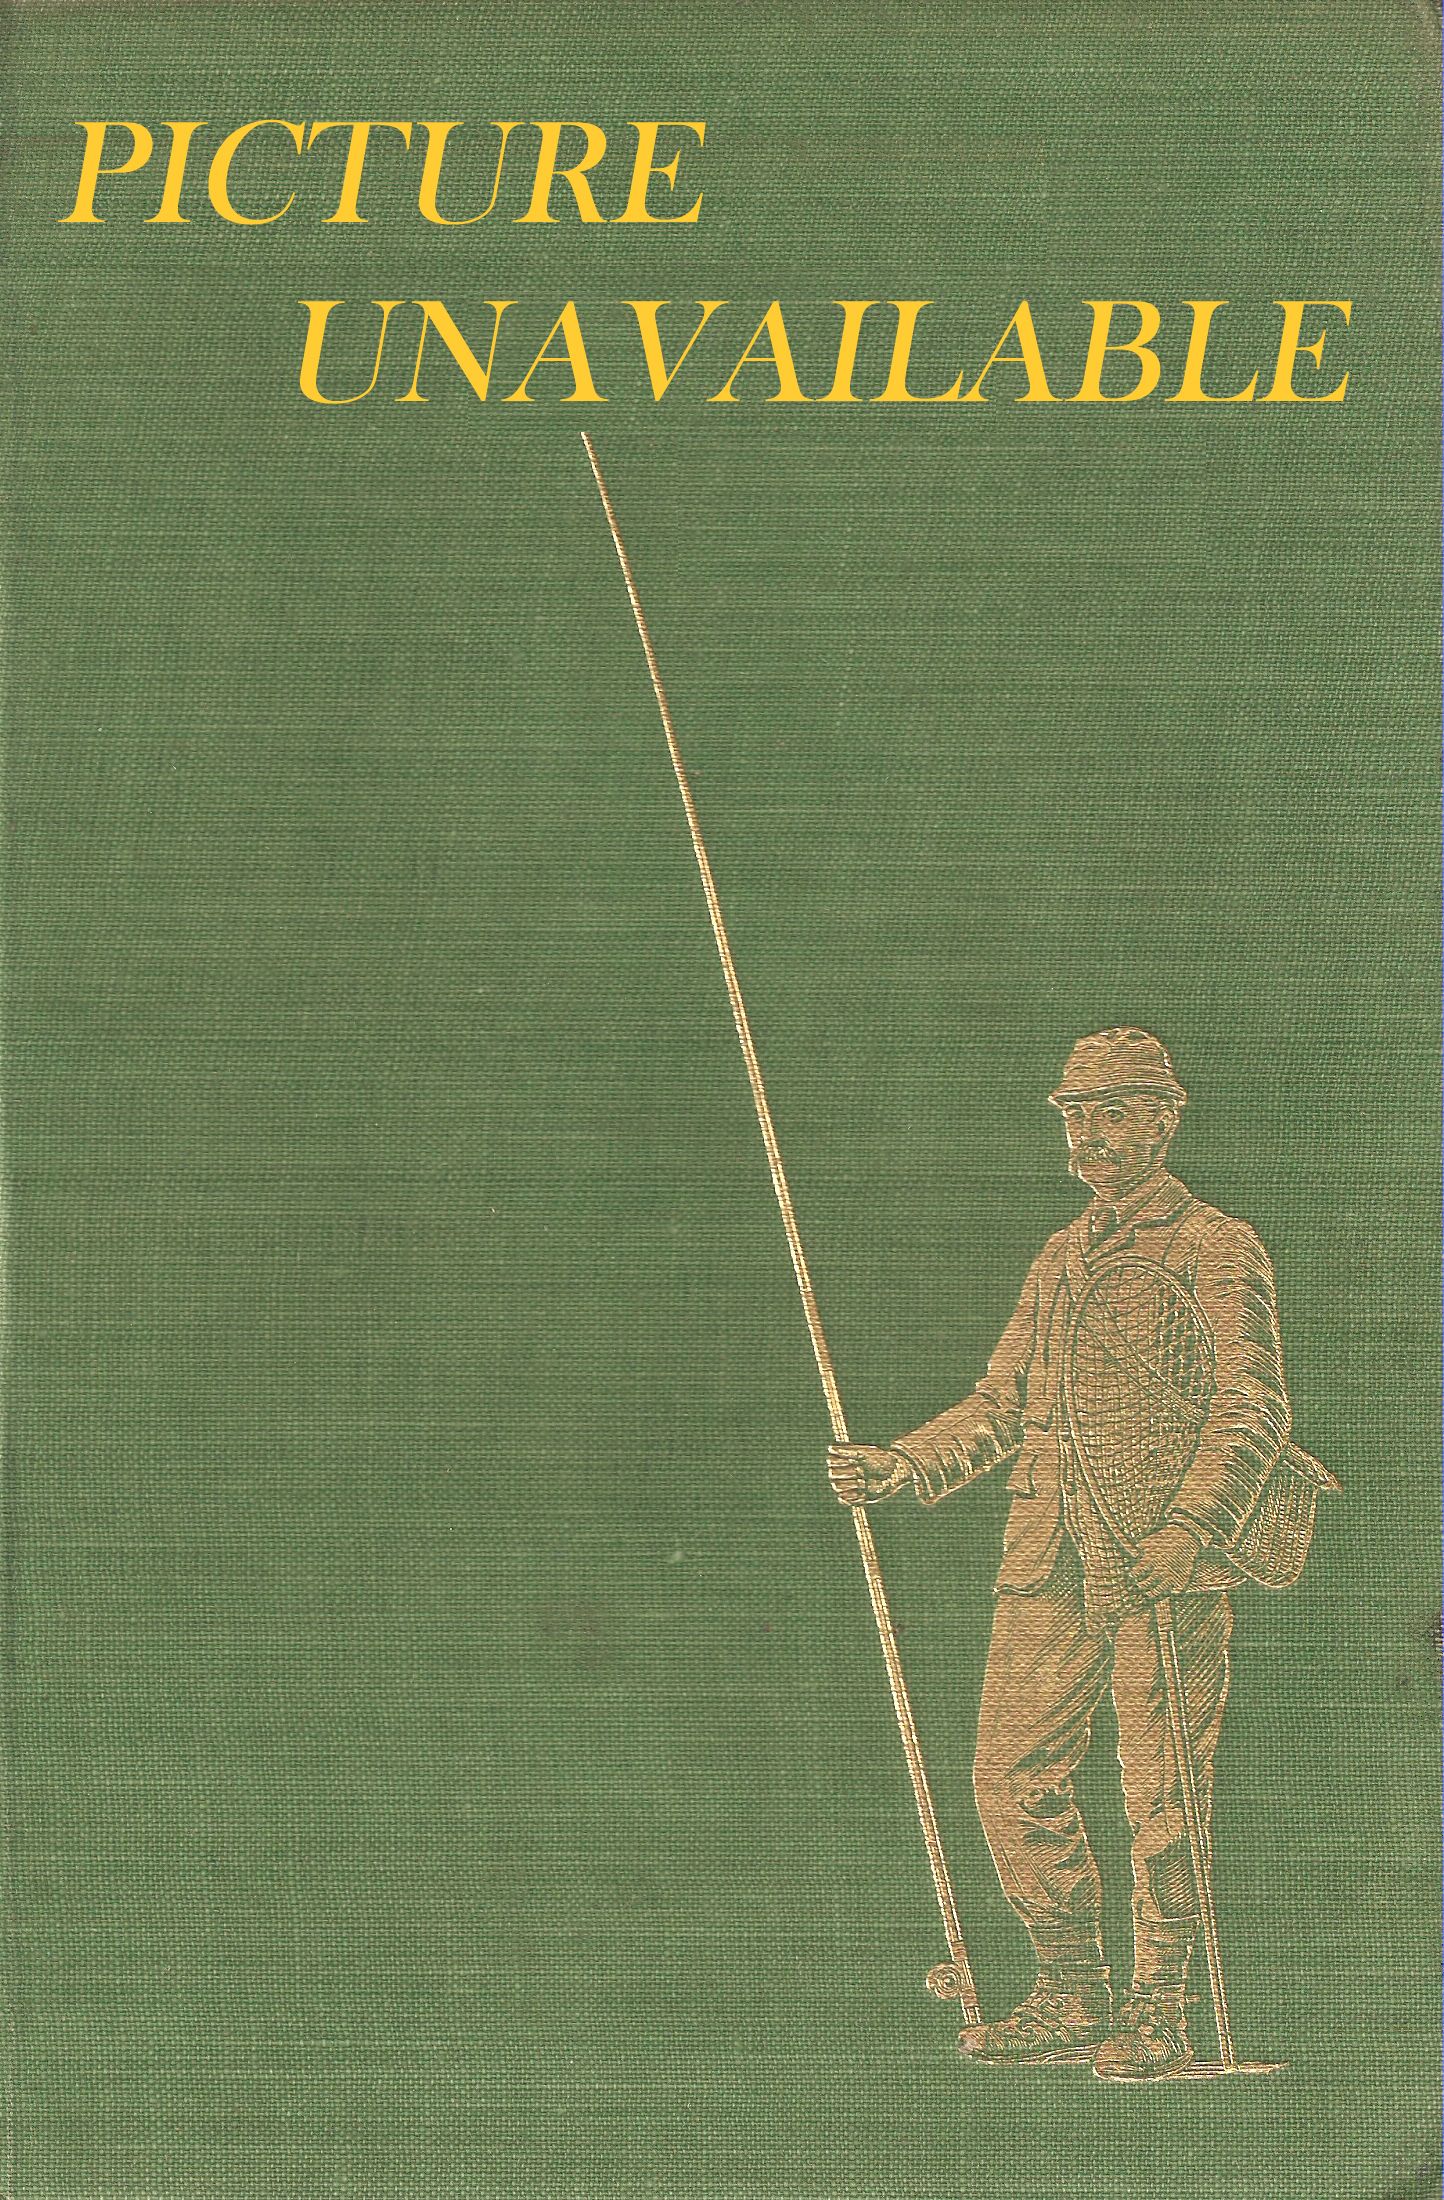 THE COMPLETE BOOK OF FISHING: A GUIDE TO FRESHWATER, SALTWATER and BIG-GAME  FISHING. By Trevor Housby, Arthur Oglesby and John Wilson.